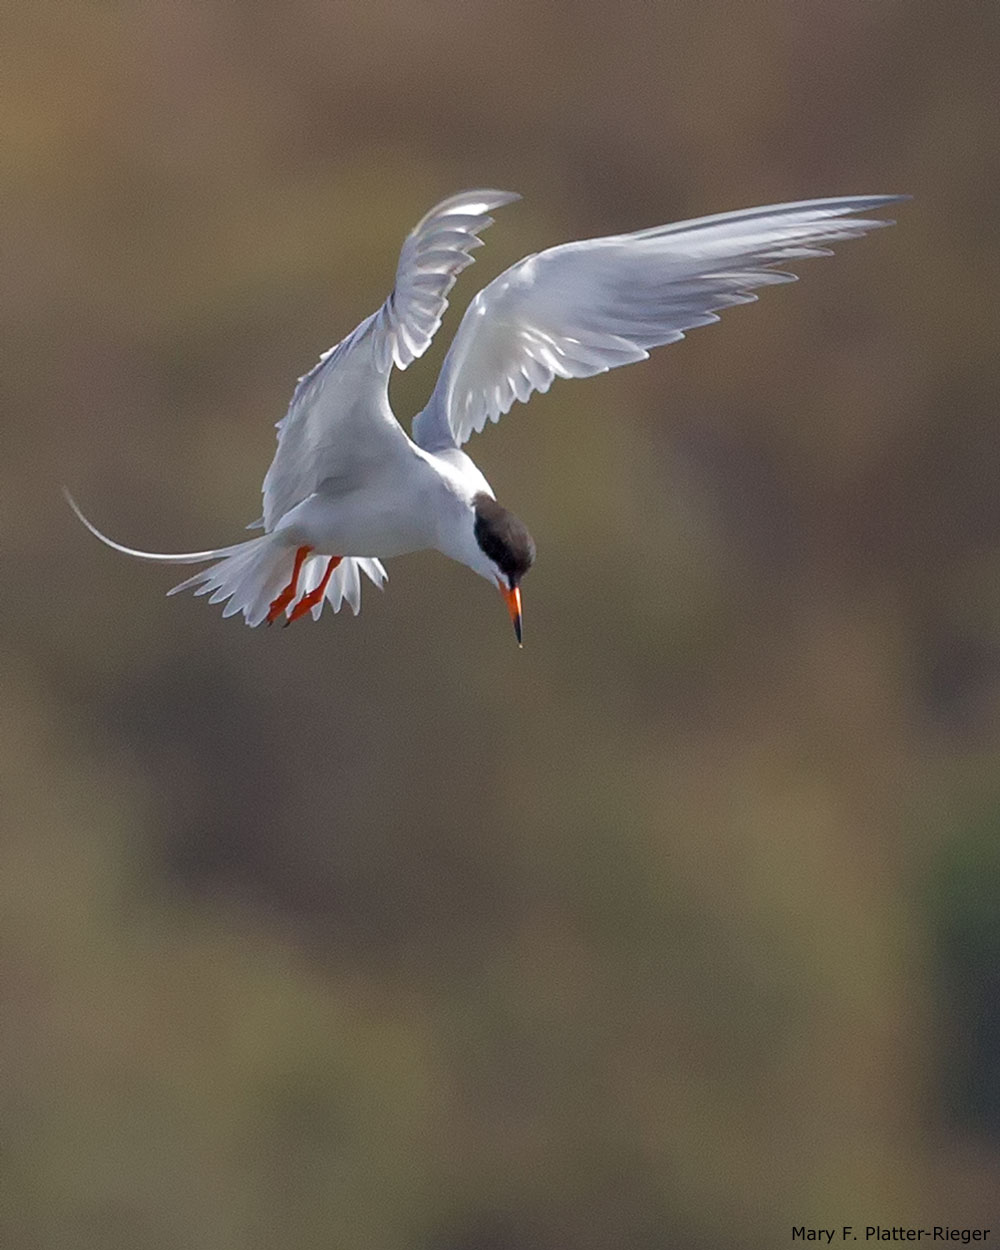 Photo of Common Tern fishing, San Diego, by Mary F. Platter-Rieger